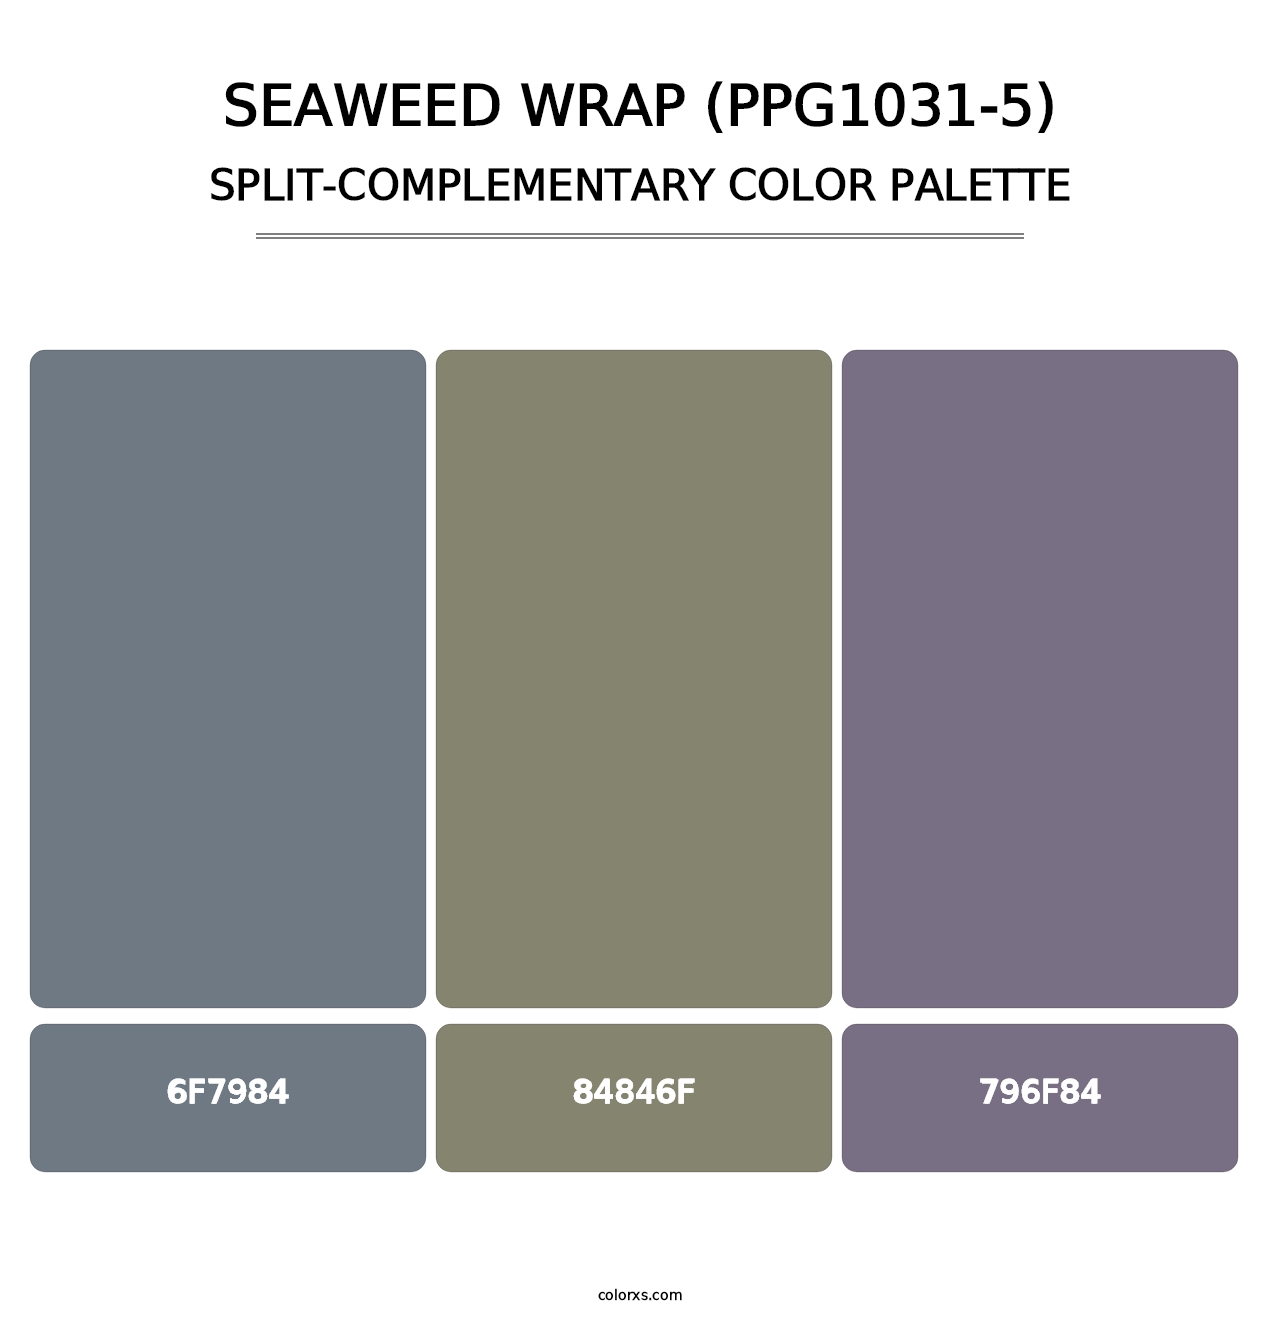 Seaweed Wrap (PPG1031-5) - Split-Complementary Color Palette